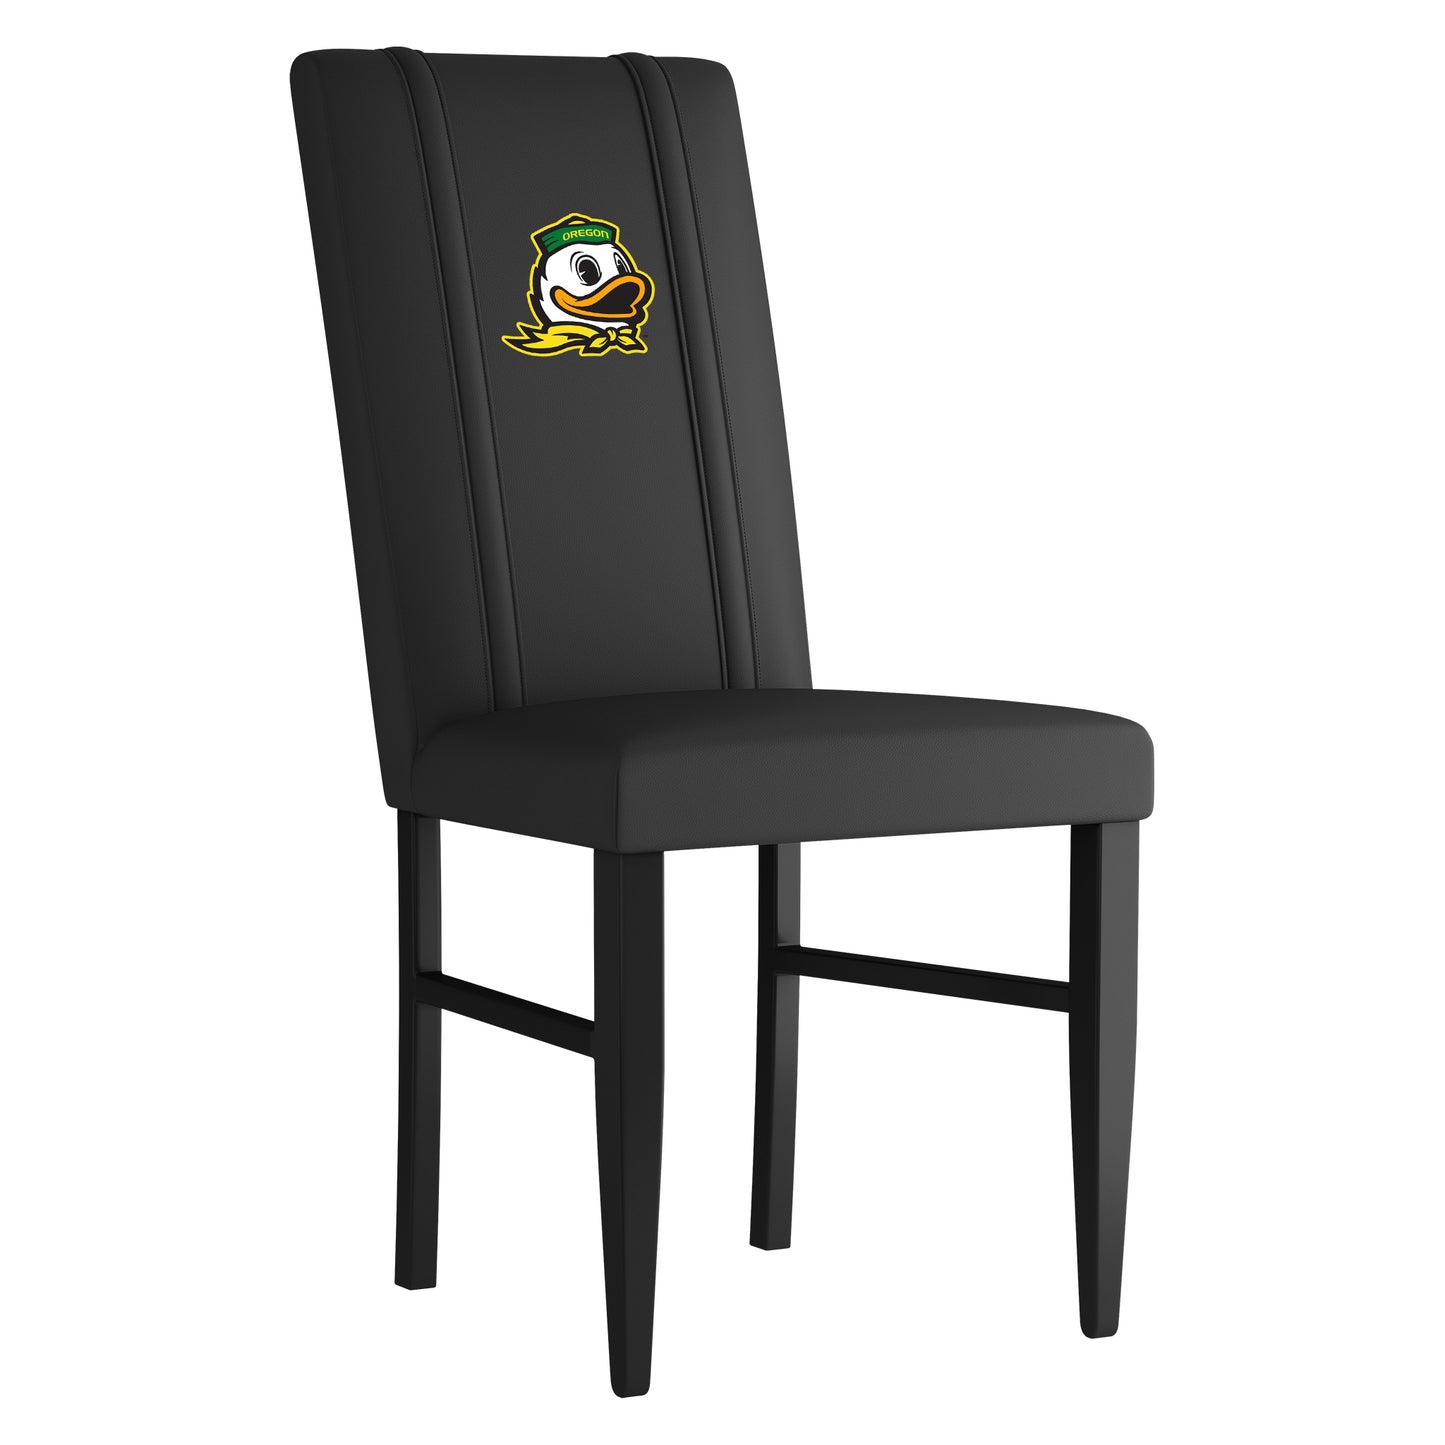 Side Chair 2000 with Oregon Ducks Mascot Logo Set of 2